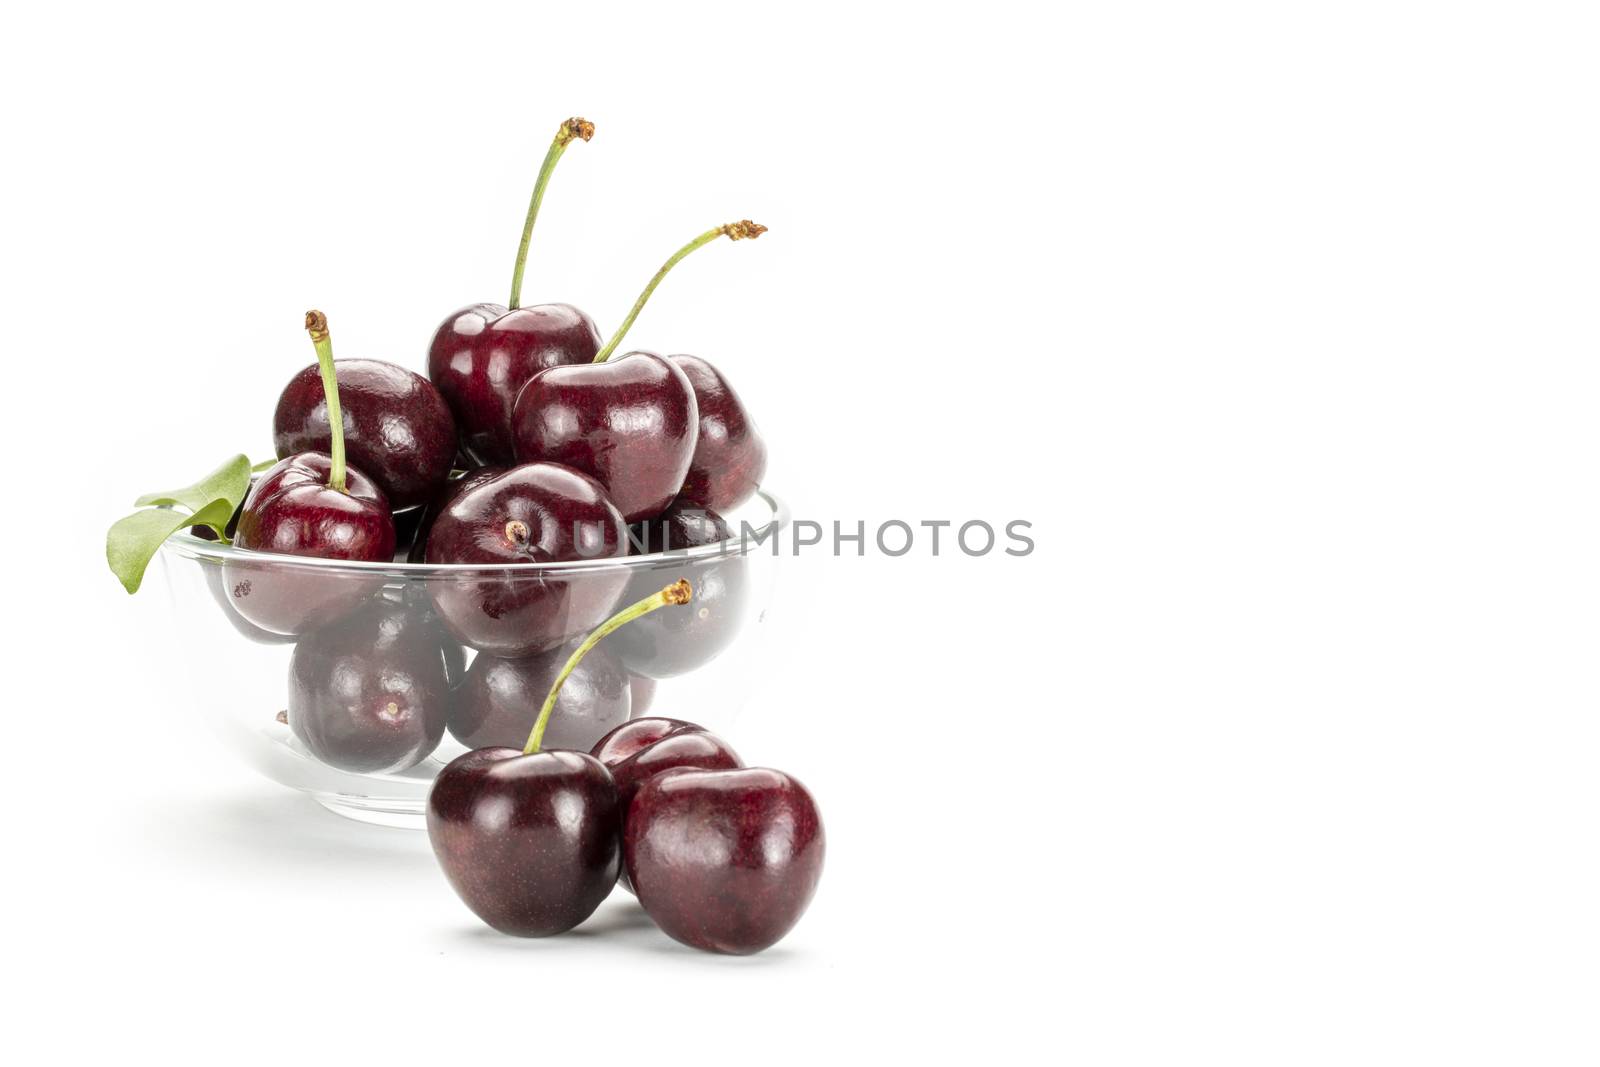 A bunch of ripe red cherries in a clear glass cup. Isolated on white background.